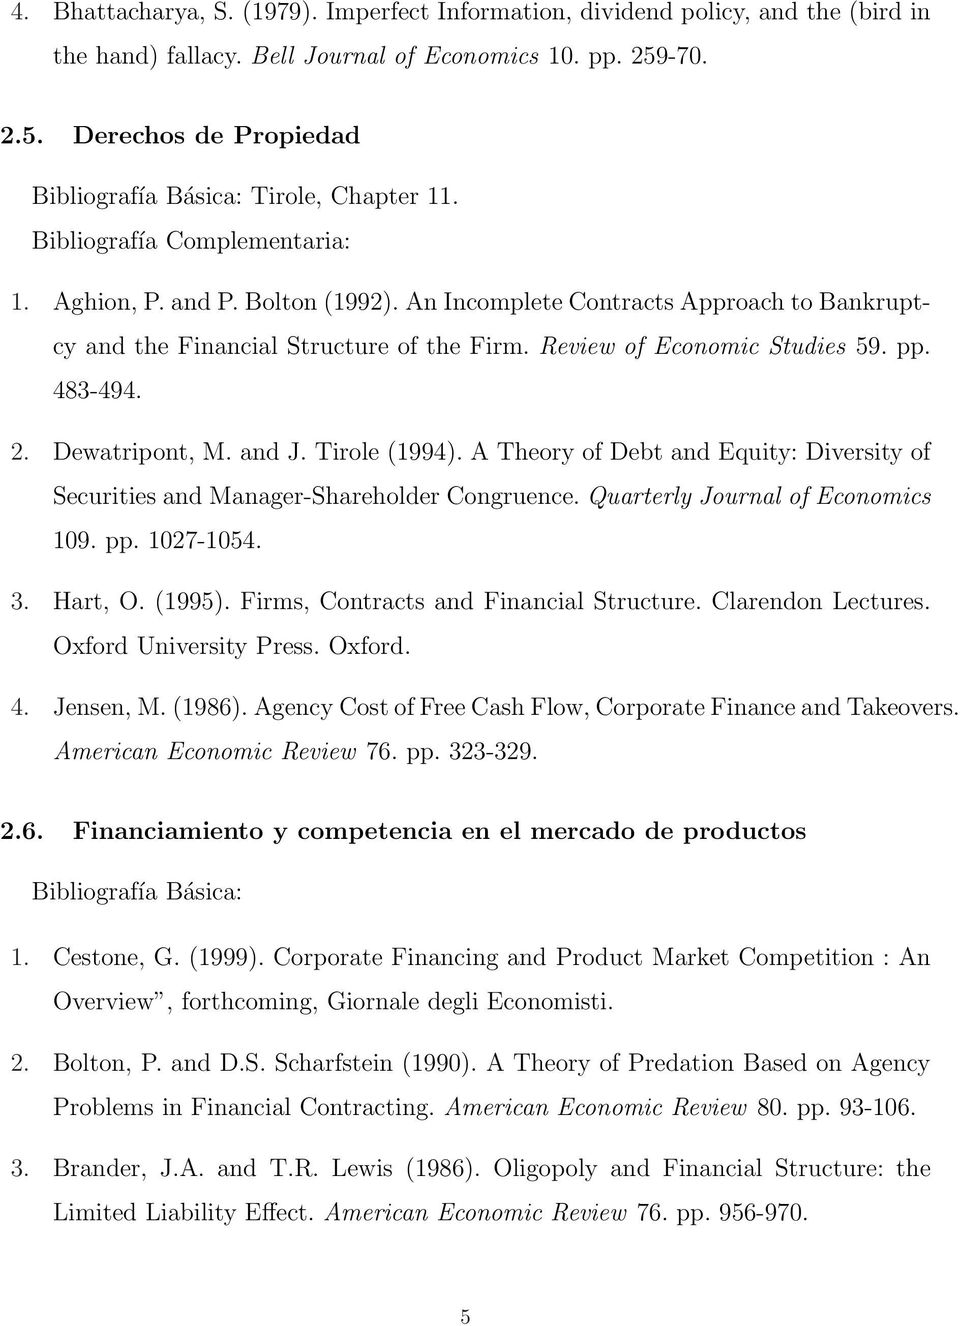 Review of Economic Studies 59. pp. 483-494. 2. Dewatripont, M. and J. Tirole (1994). A Theory of Debt and Equity: Diversity of Securities and Manager-Shareholder Congruence.